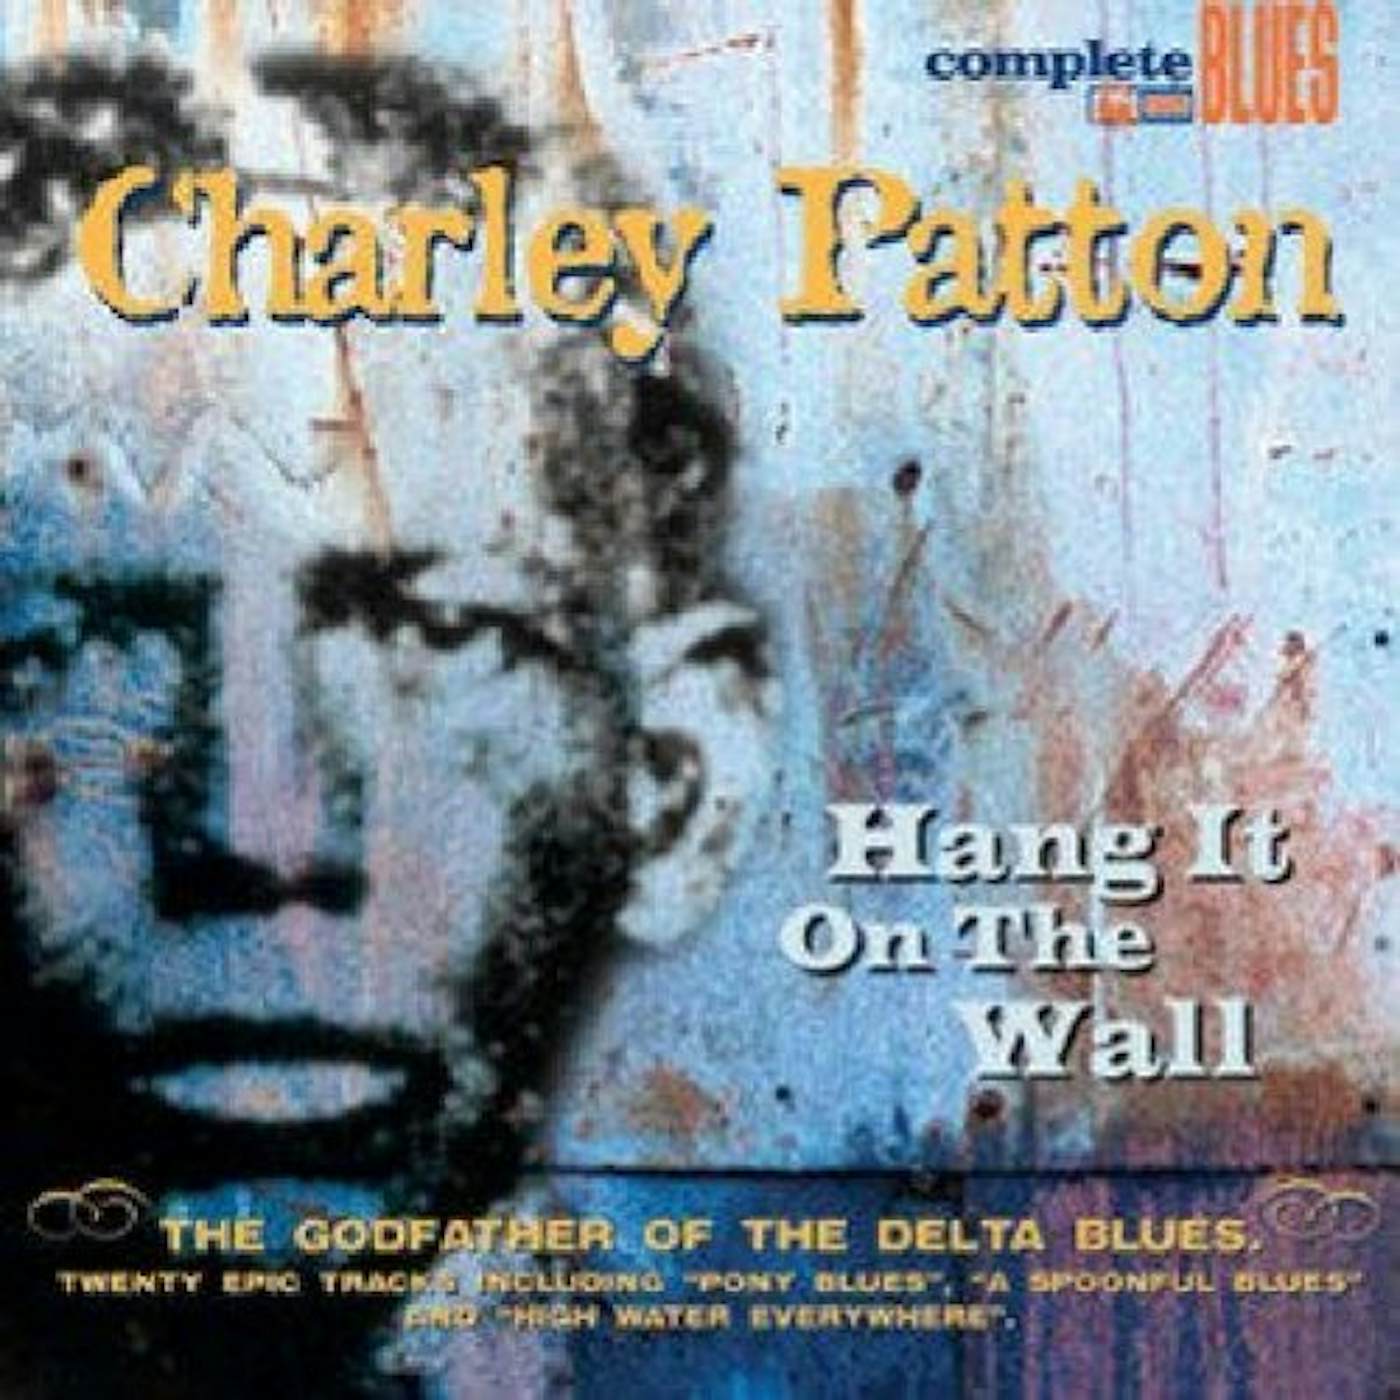 Charley Patton HANG IT ON THE WALL CD